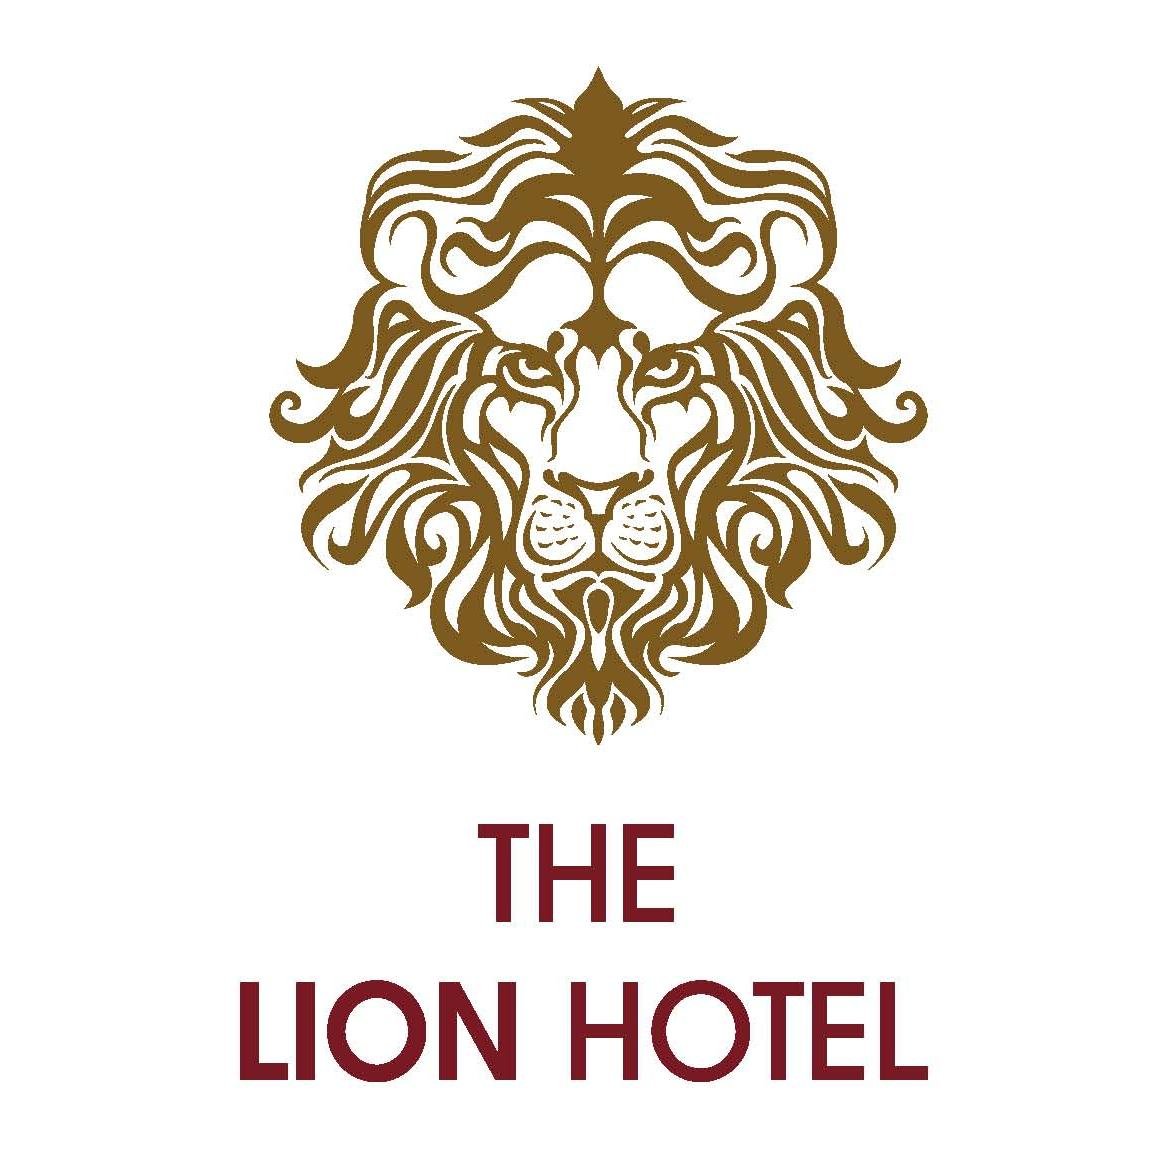 The Lion Hotel sits proudly in the historic town of Belper. A time-honoured building that began life as a coaching inn in the 18th Century.